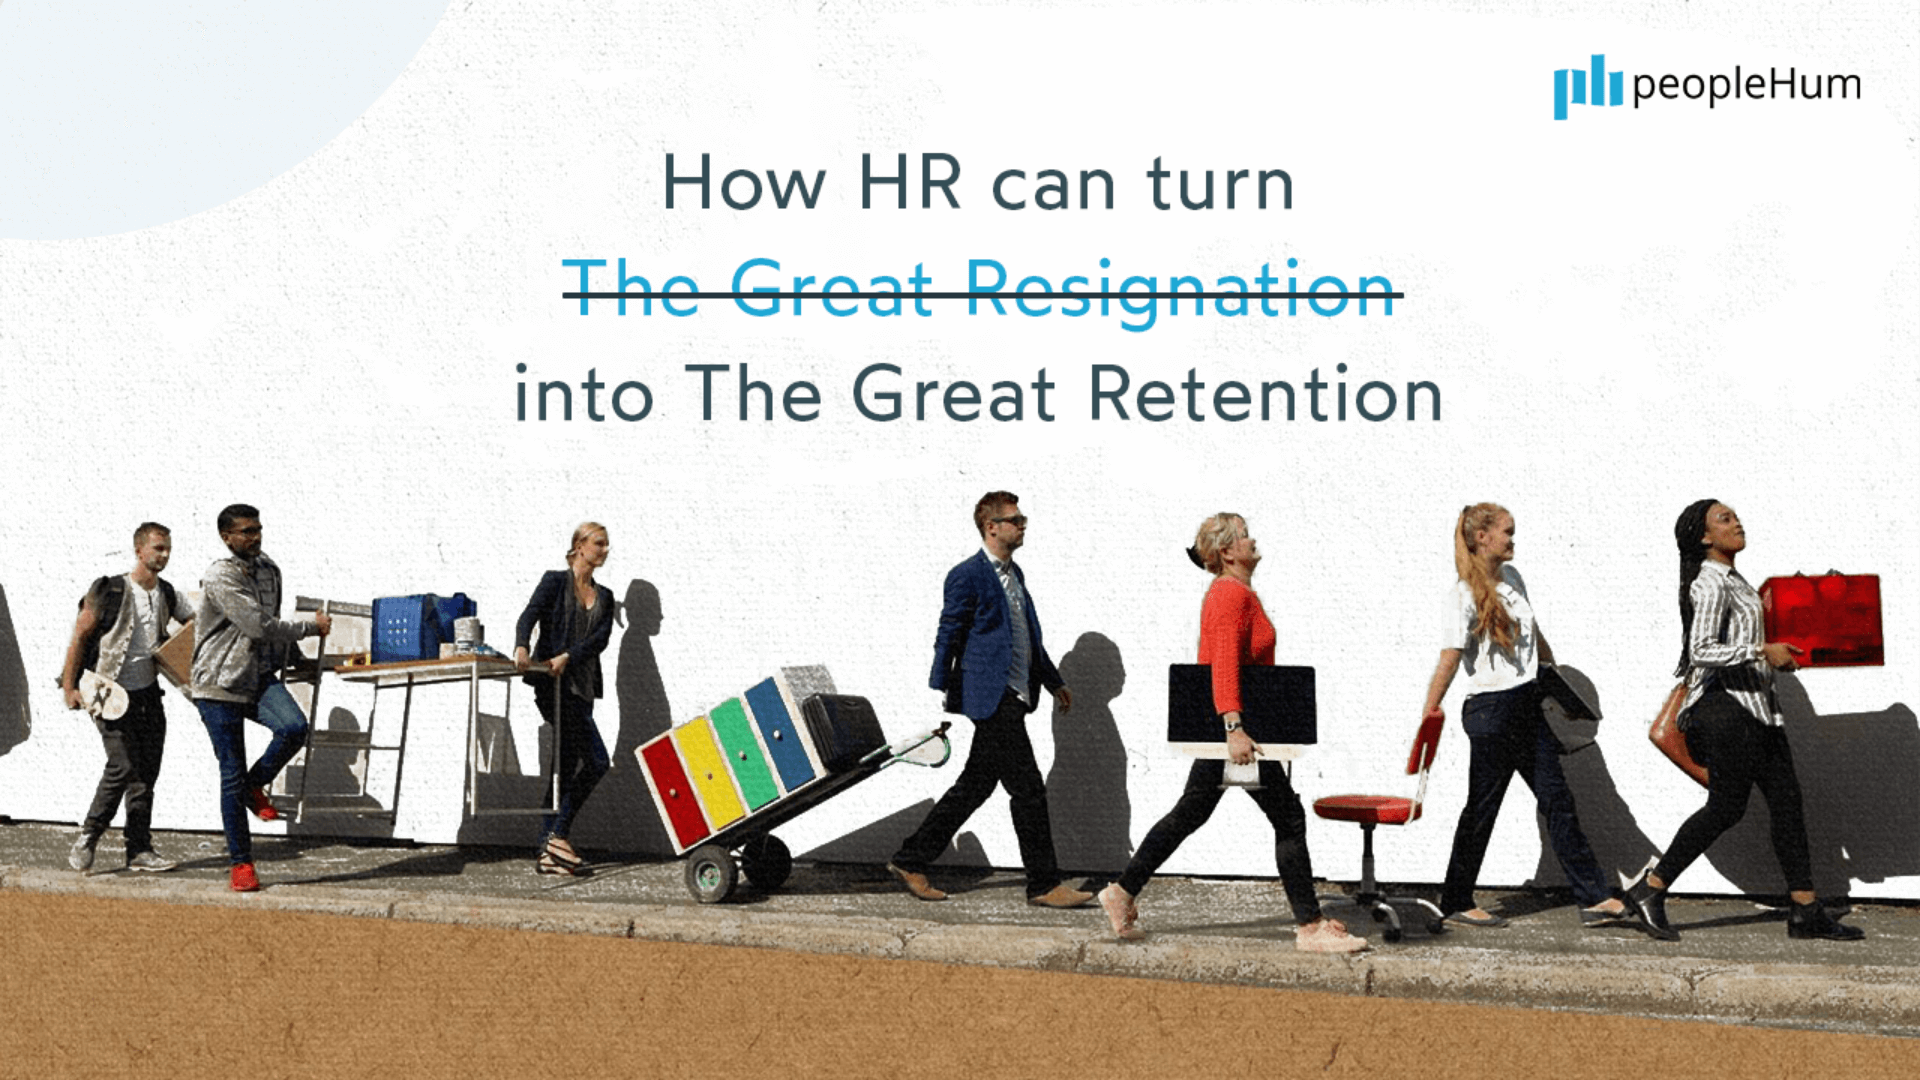 How HR can turn The Great Resignation into The Great Retention